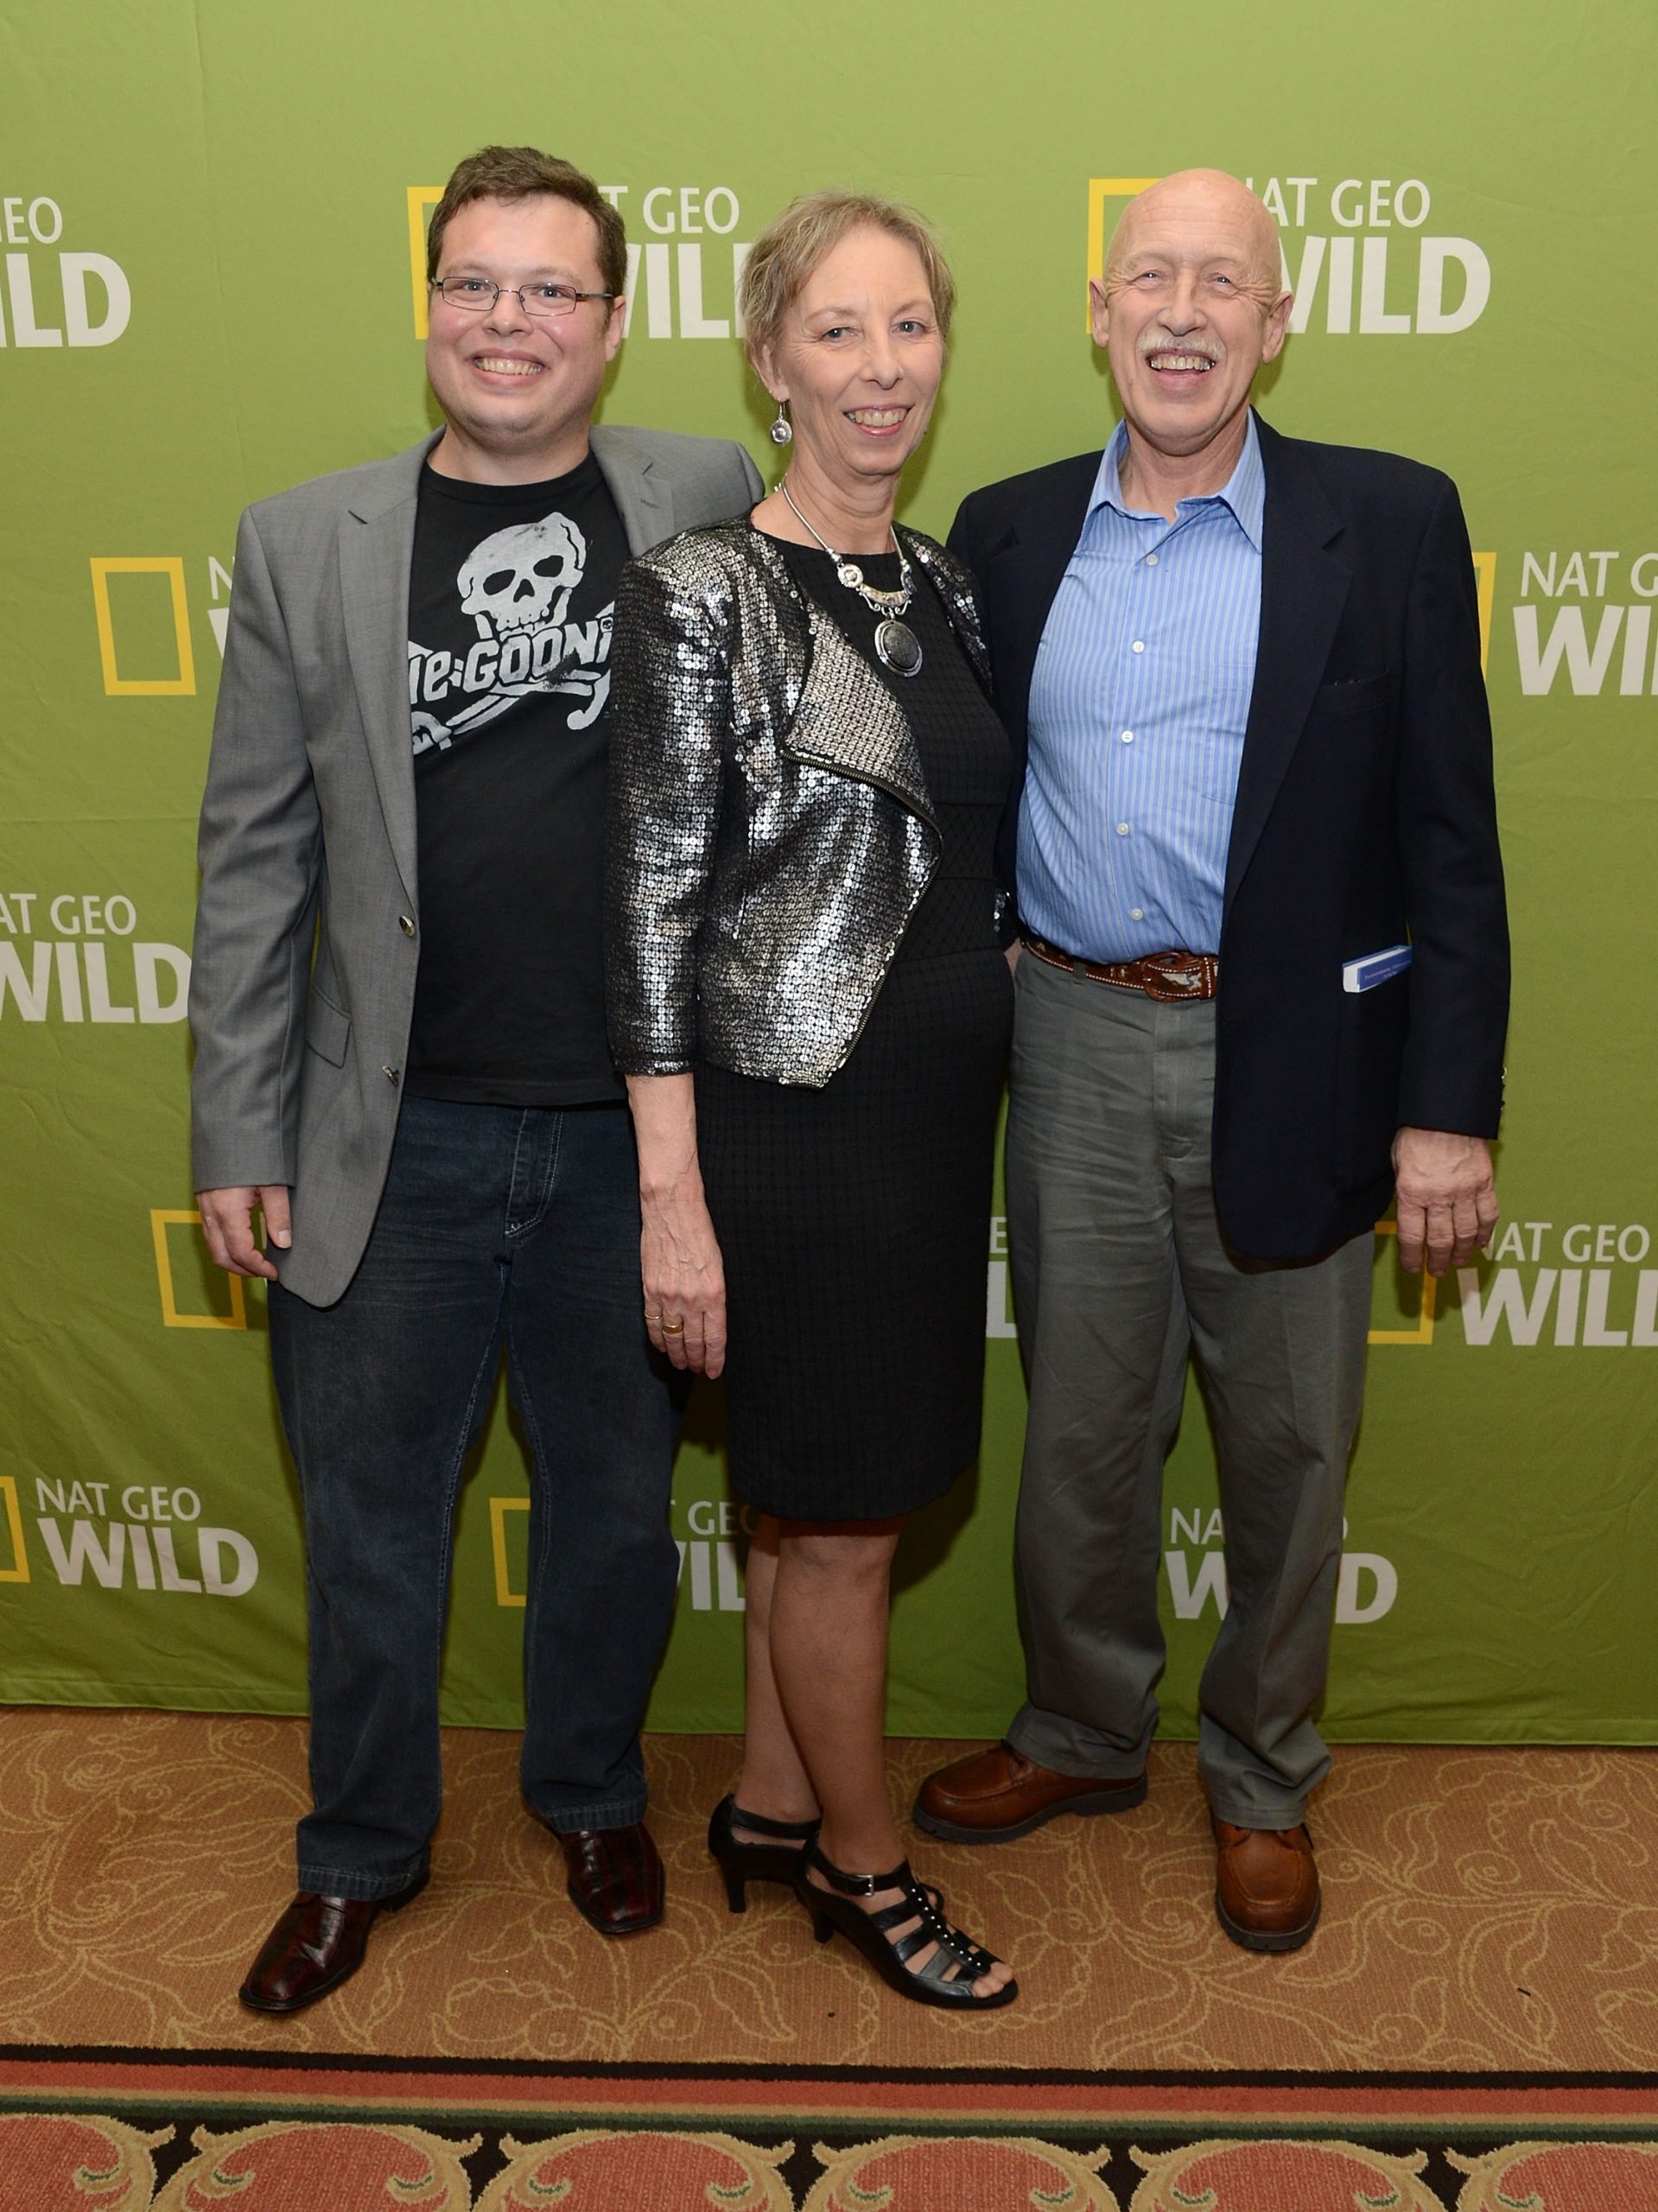 The Pol family: Charles Pol, Diane Pol, and Dr. Jan Pol of 'The Incredible Dr. Pol'